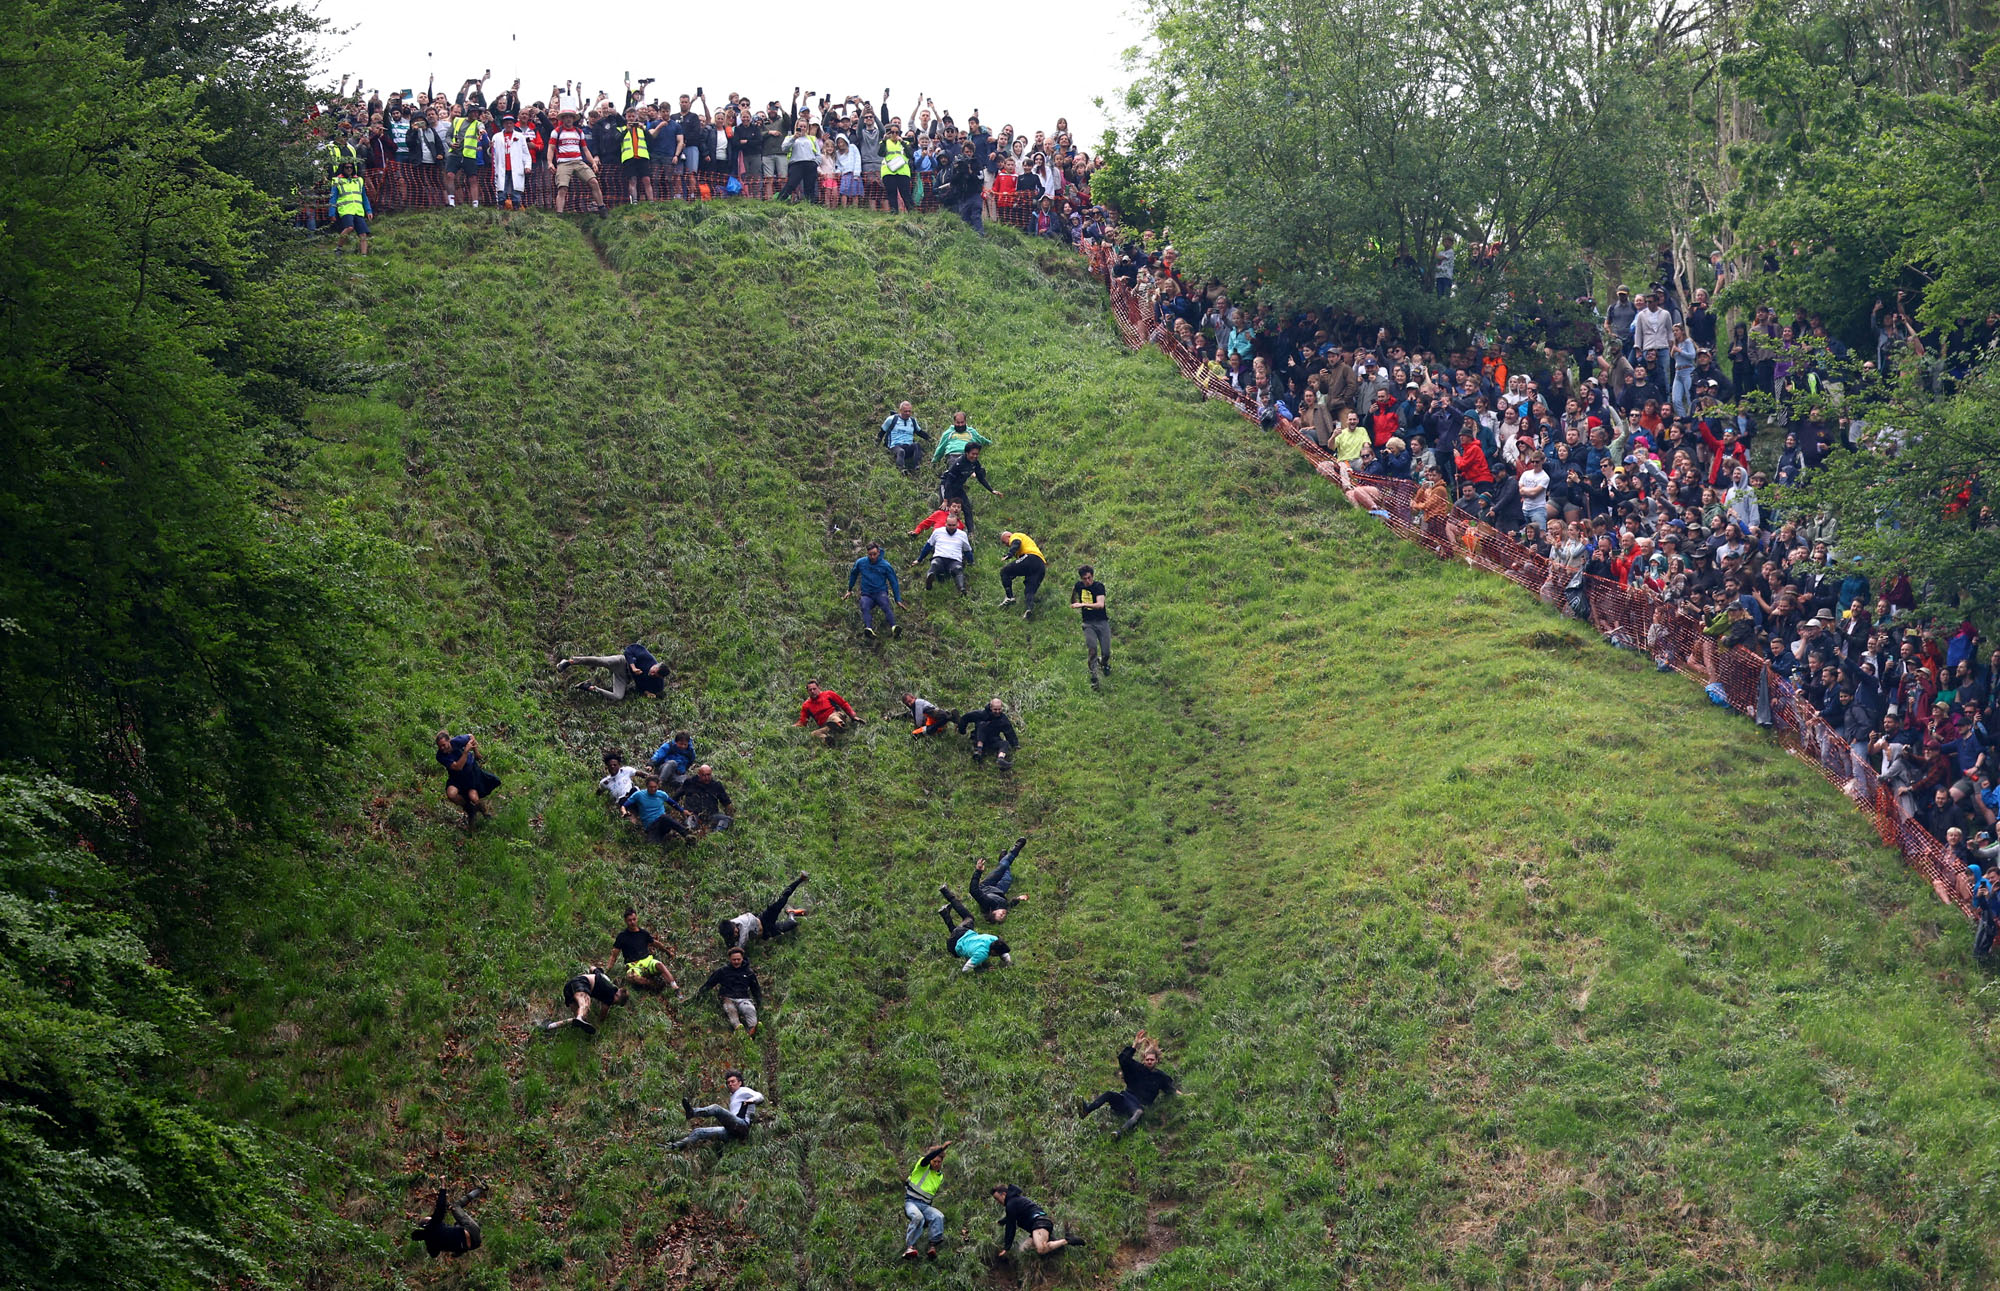 Onlookers cheer during the Cooper’s Hill Cheese-Rolling Race.